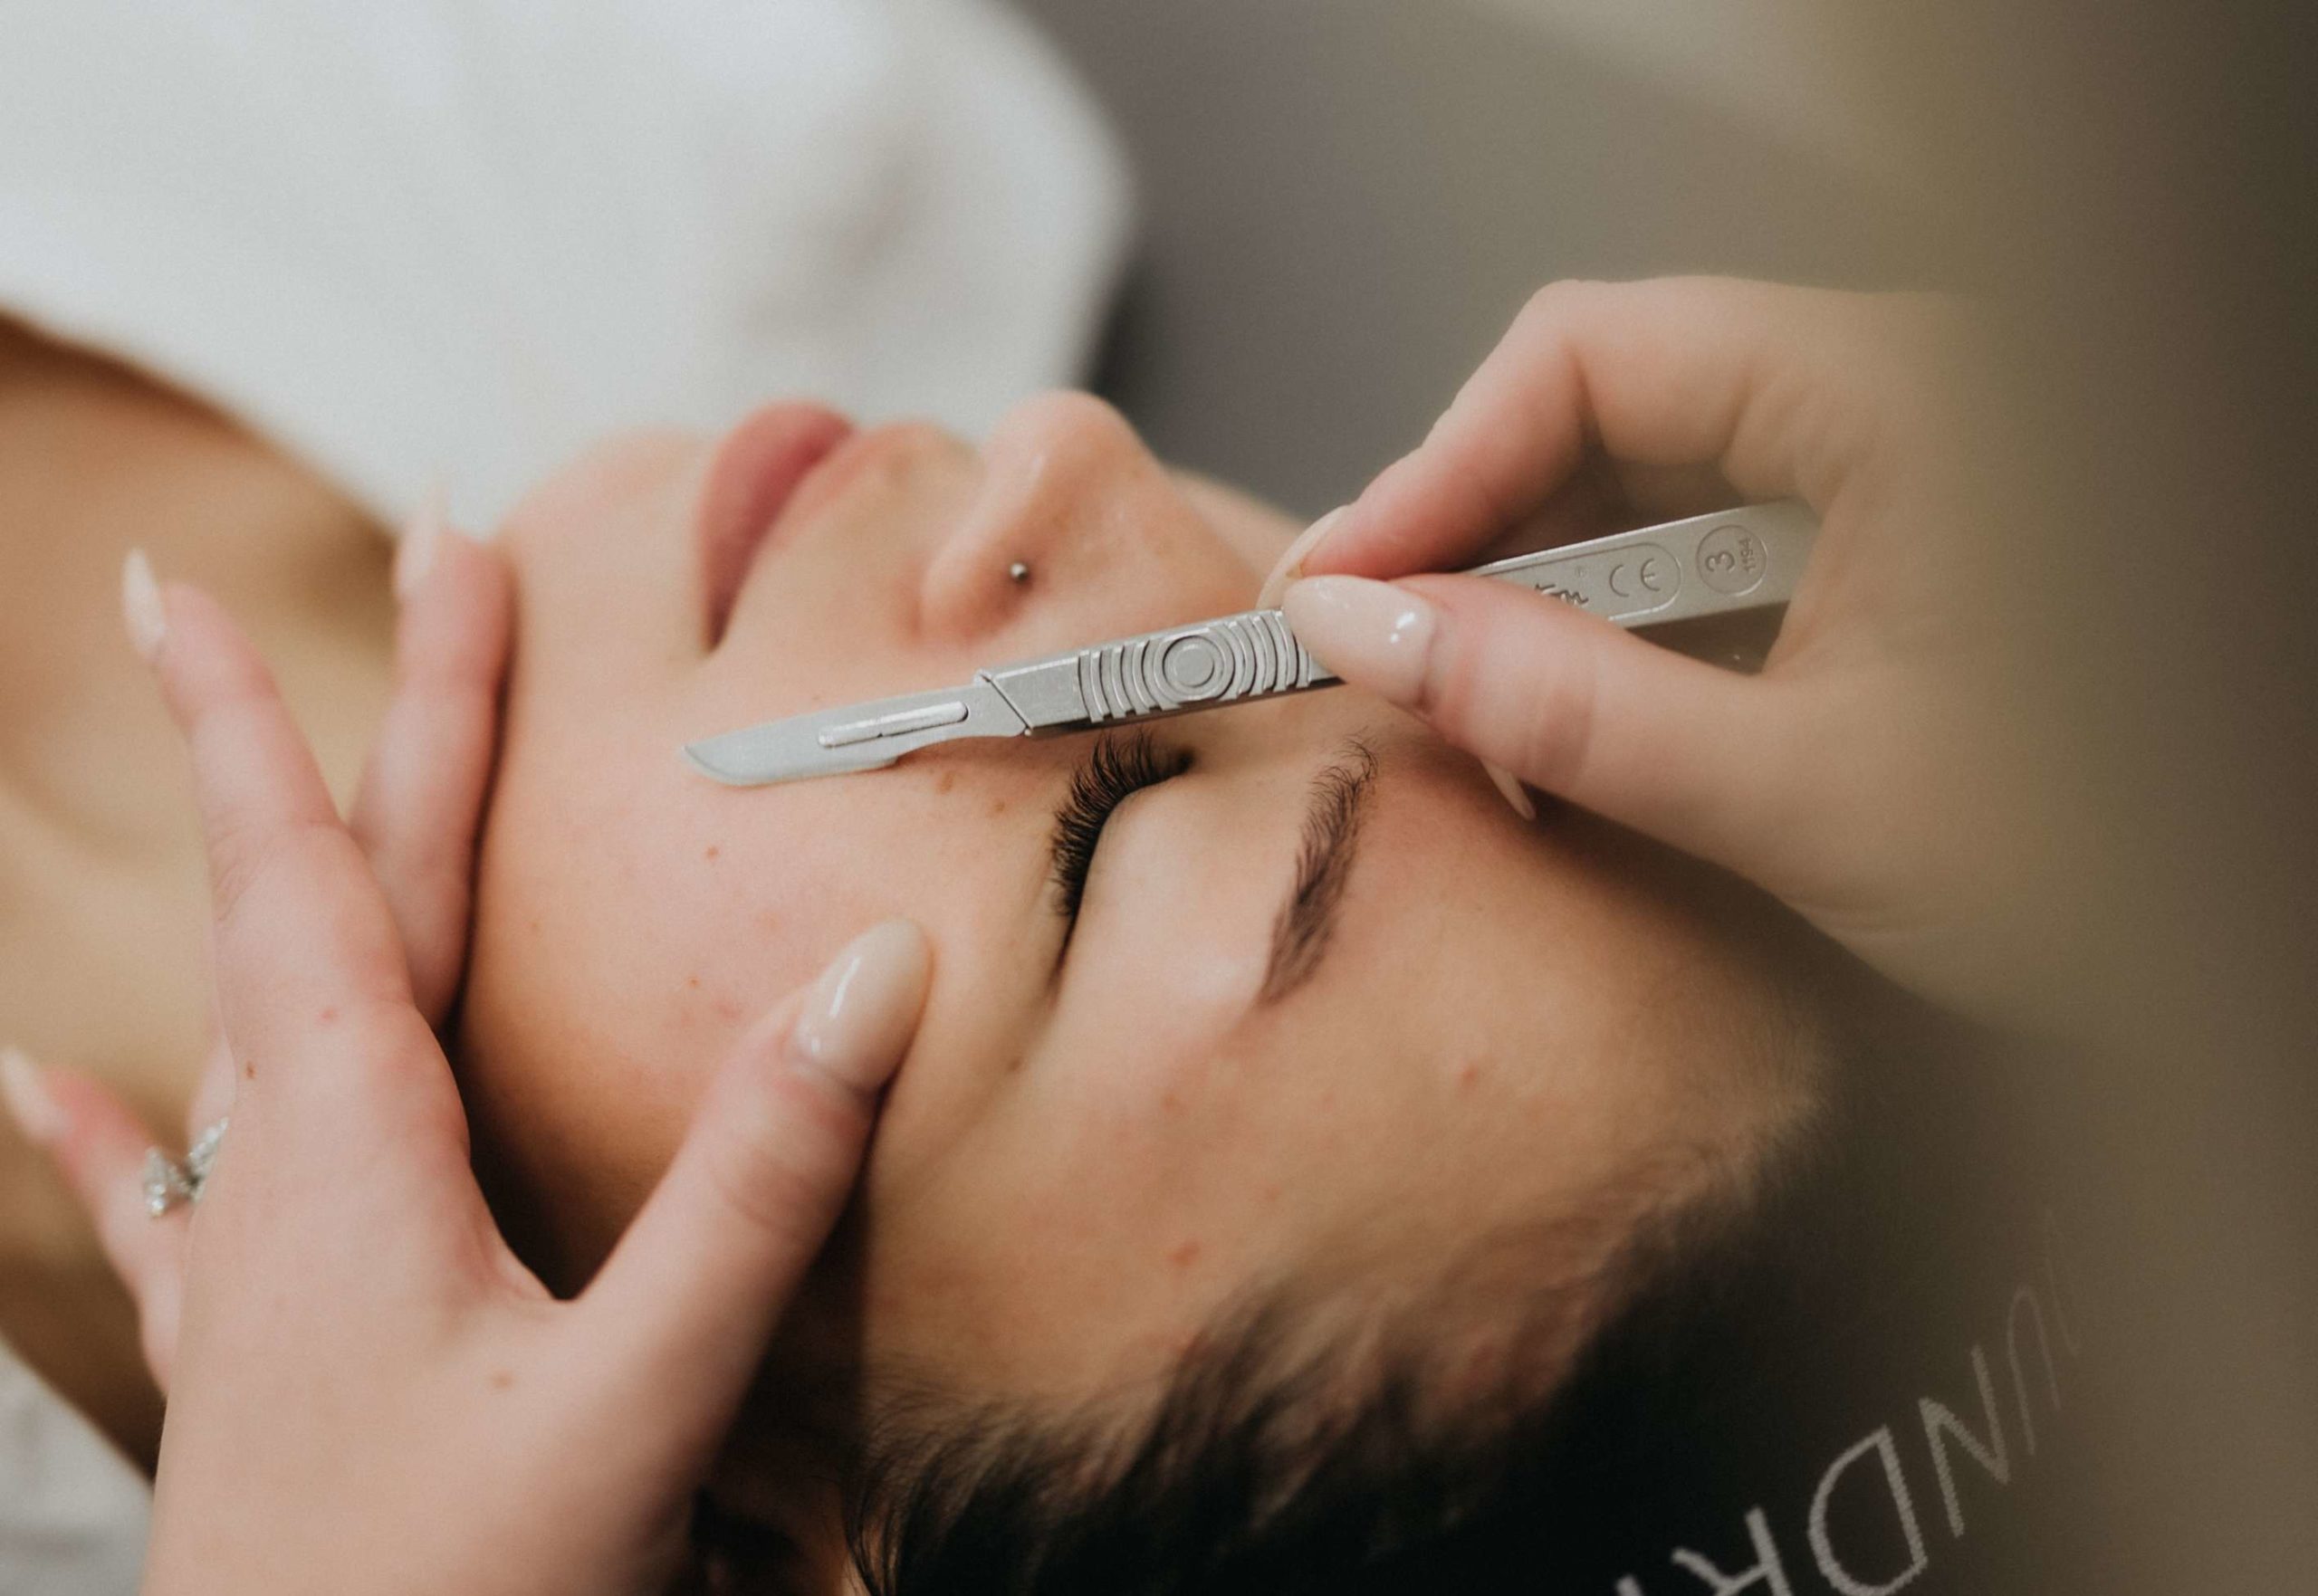 A woman in a facial salon having dermaplaning done to her face to remove hair and improve skin texture.